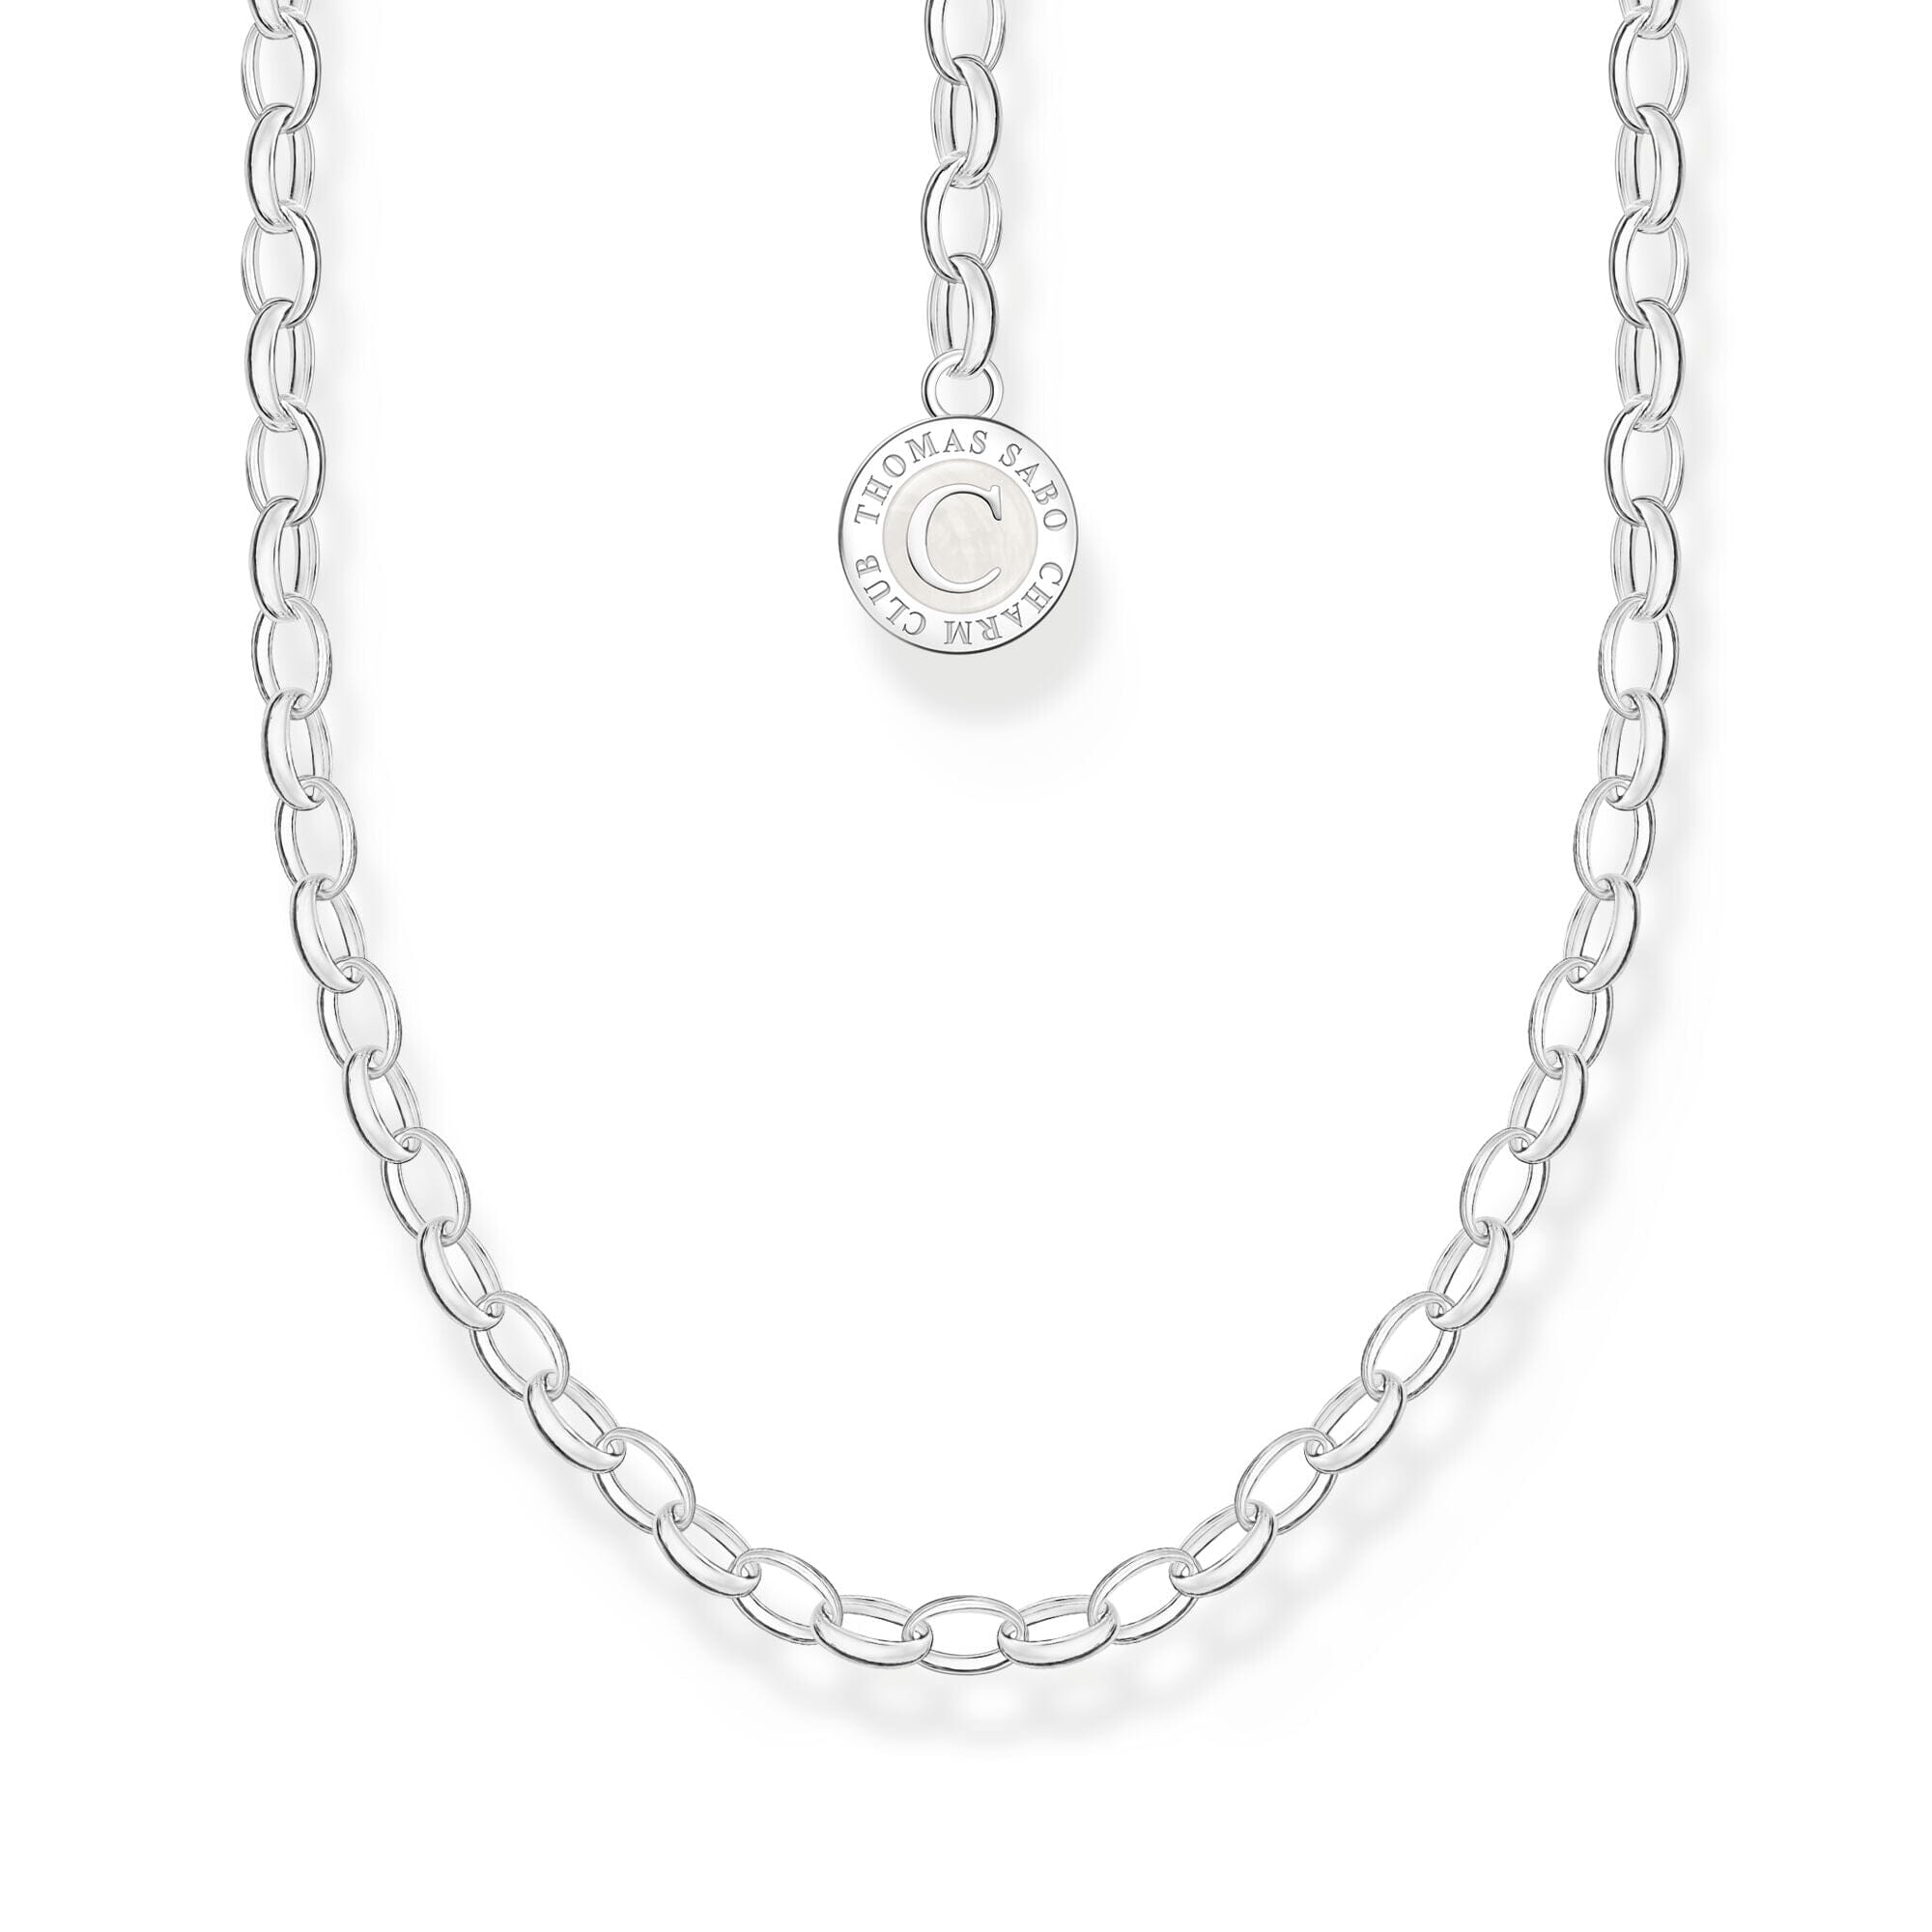 THOMAS SABO Member Charm Necklaces with Charmista Coin Necklaces THOMAS SABO Charmista 